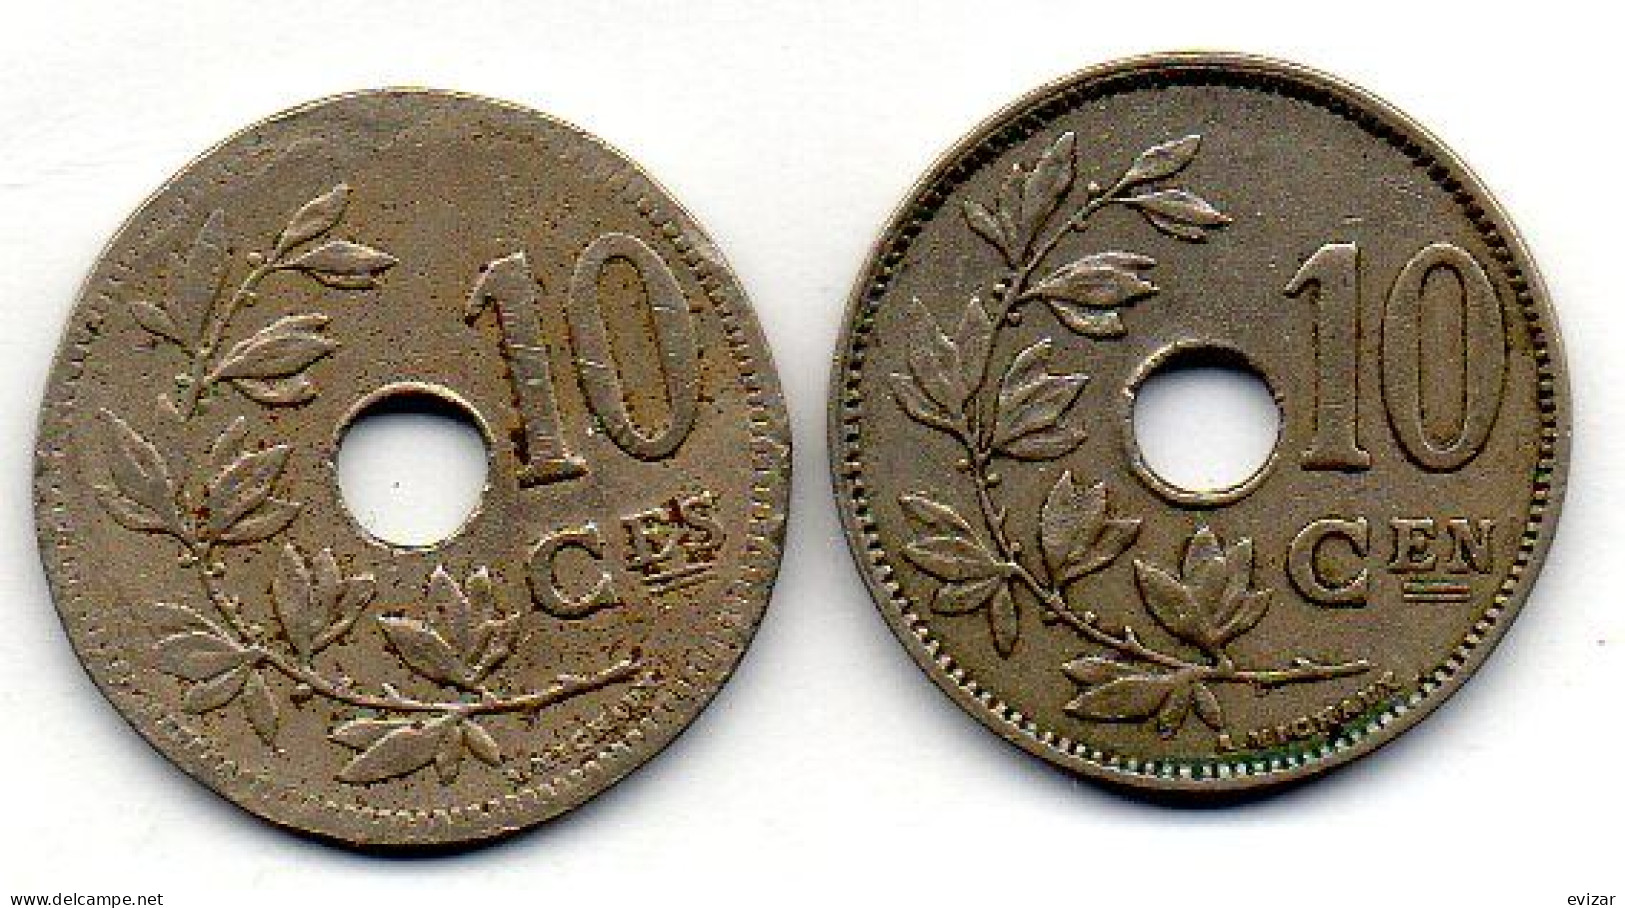 BELGIUM - Set Of Two Coins 10 Centimes, Copper-Nickel, Year 1923, 1929, KM # 85.1, 86, French & Dutch Legend - 10 Centimes